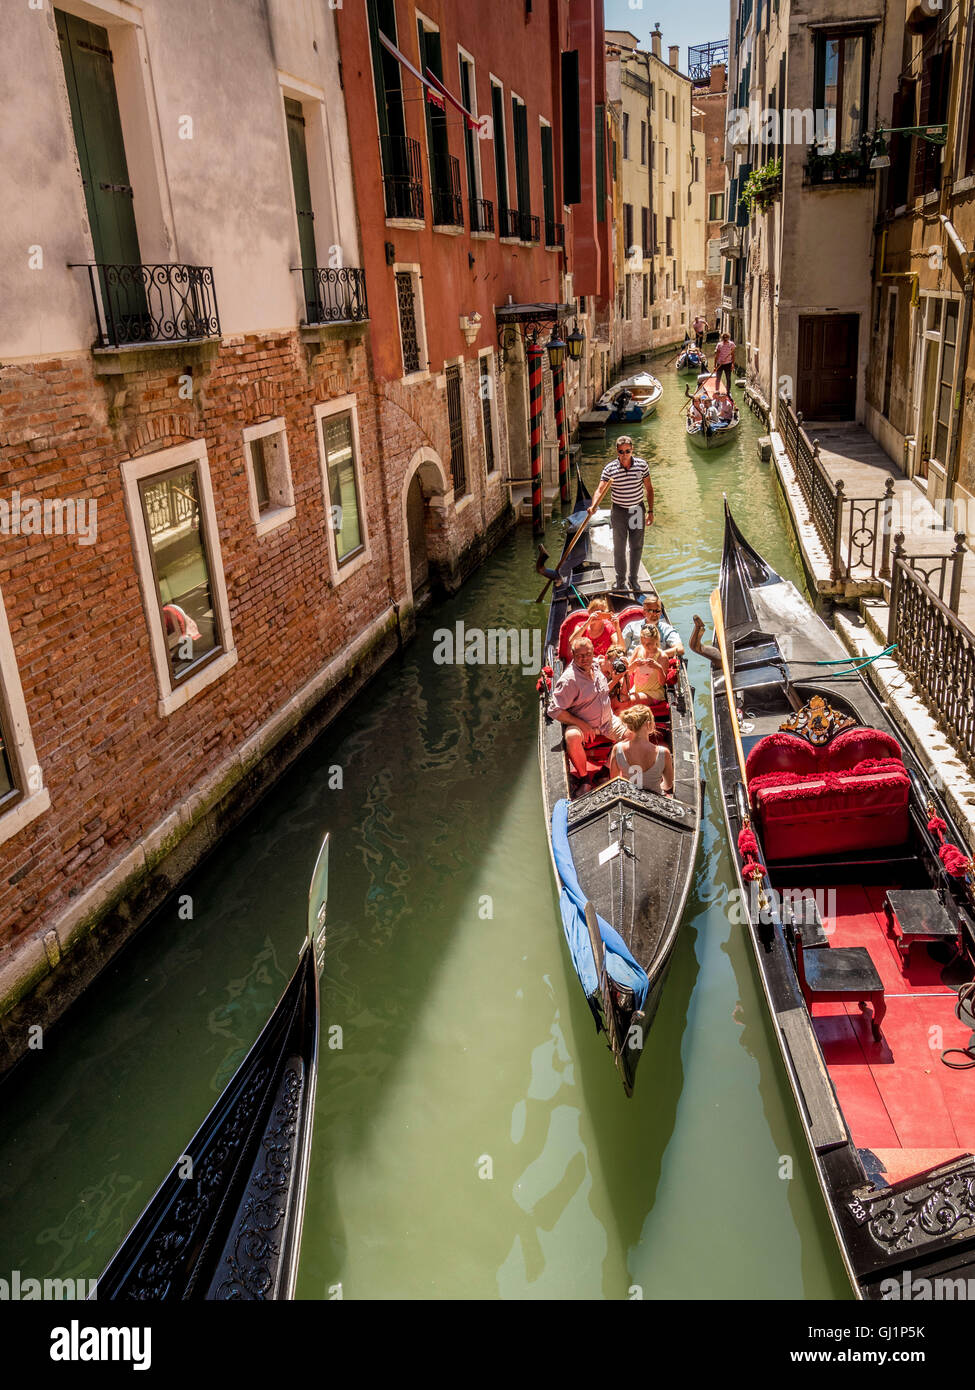 Gondolas passing each other on a narrow, congested canal in Venice, Italy. Stock Photo